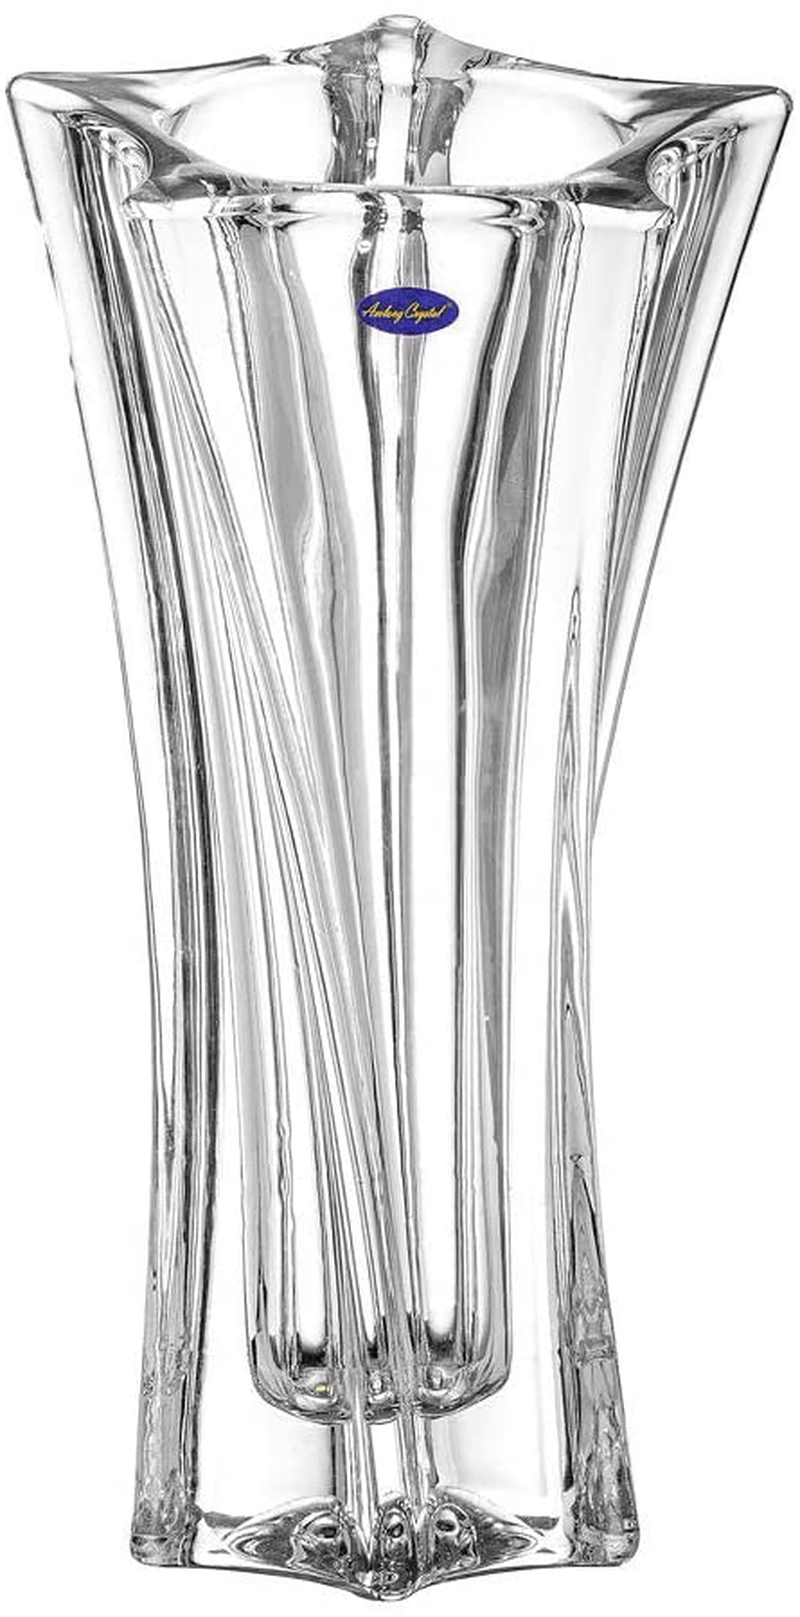 Amlong Crystal Large Size Clear Floral Vase 12 inches High (6 inch Top and 3 inch Bottom) Home & Garden > Decor > Vases Amlong Crystal Rising Star  